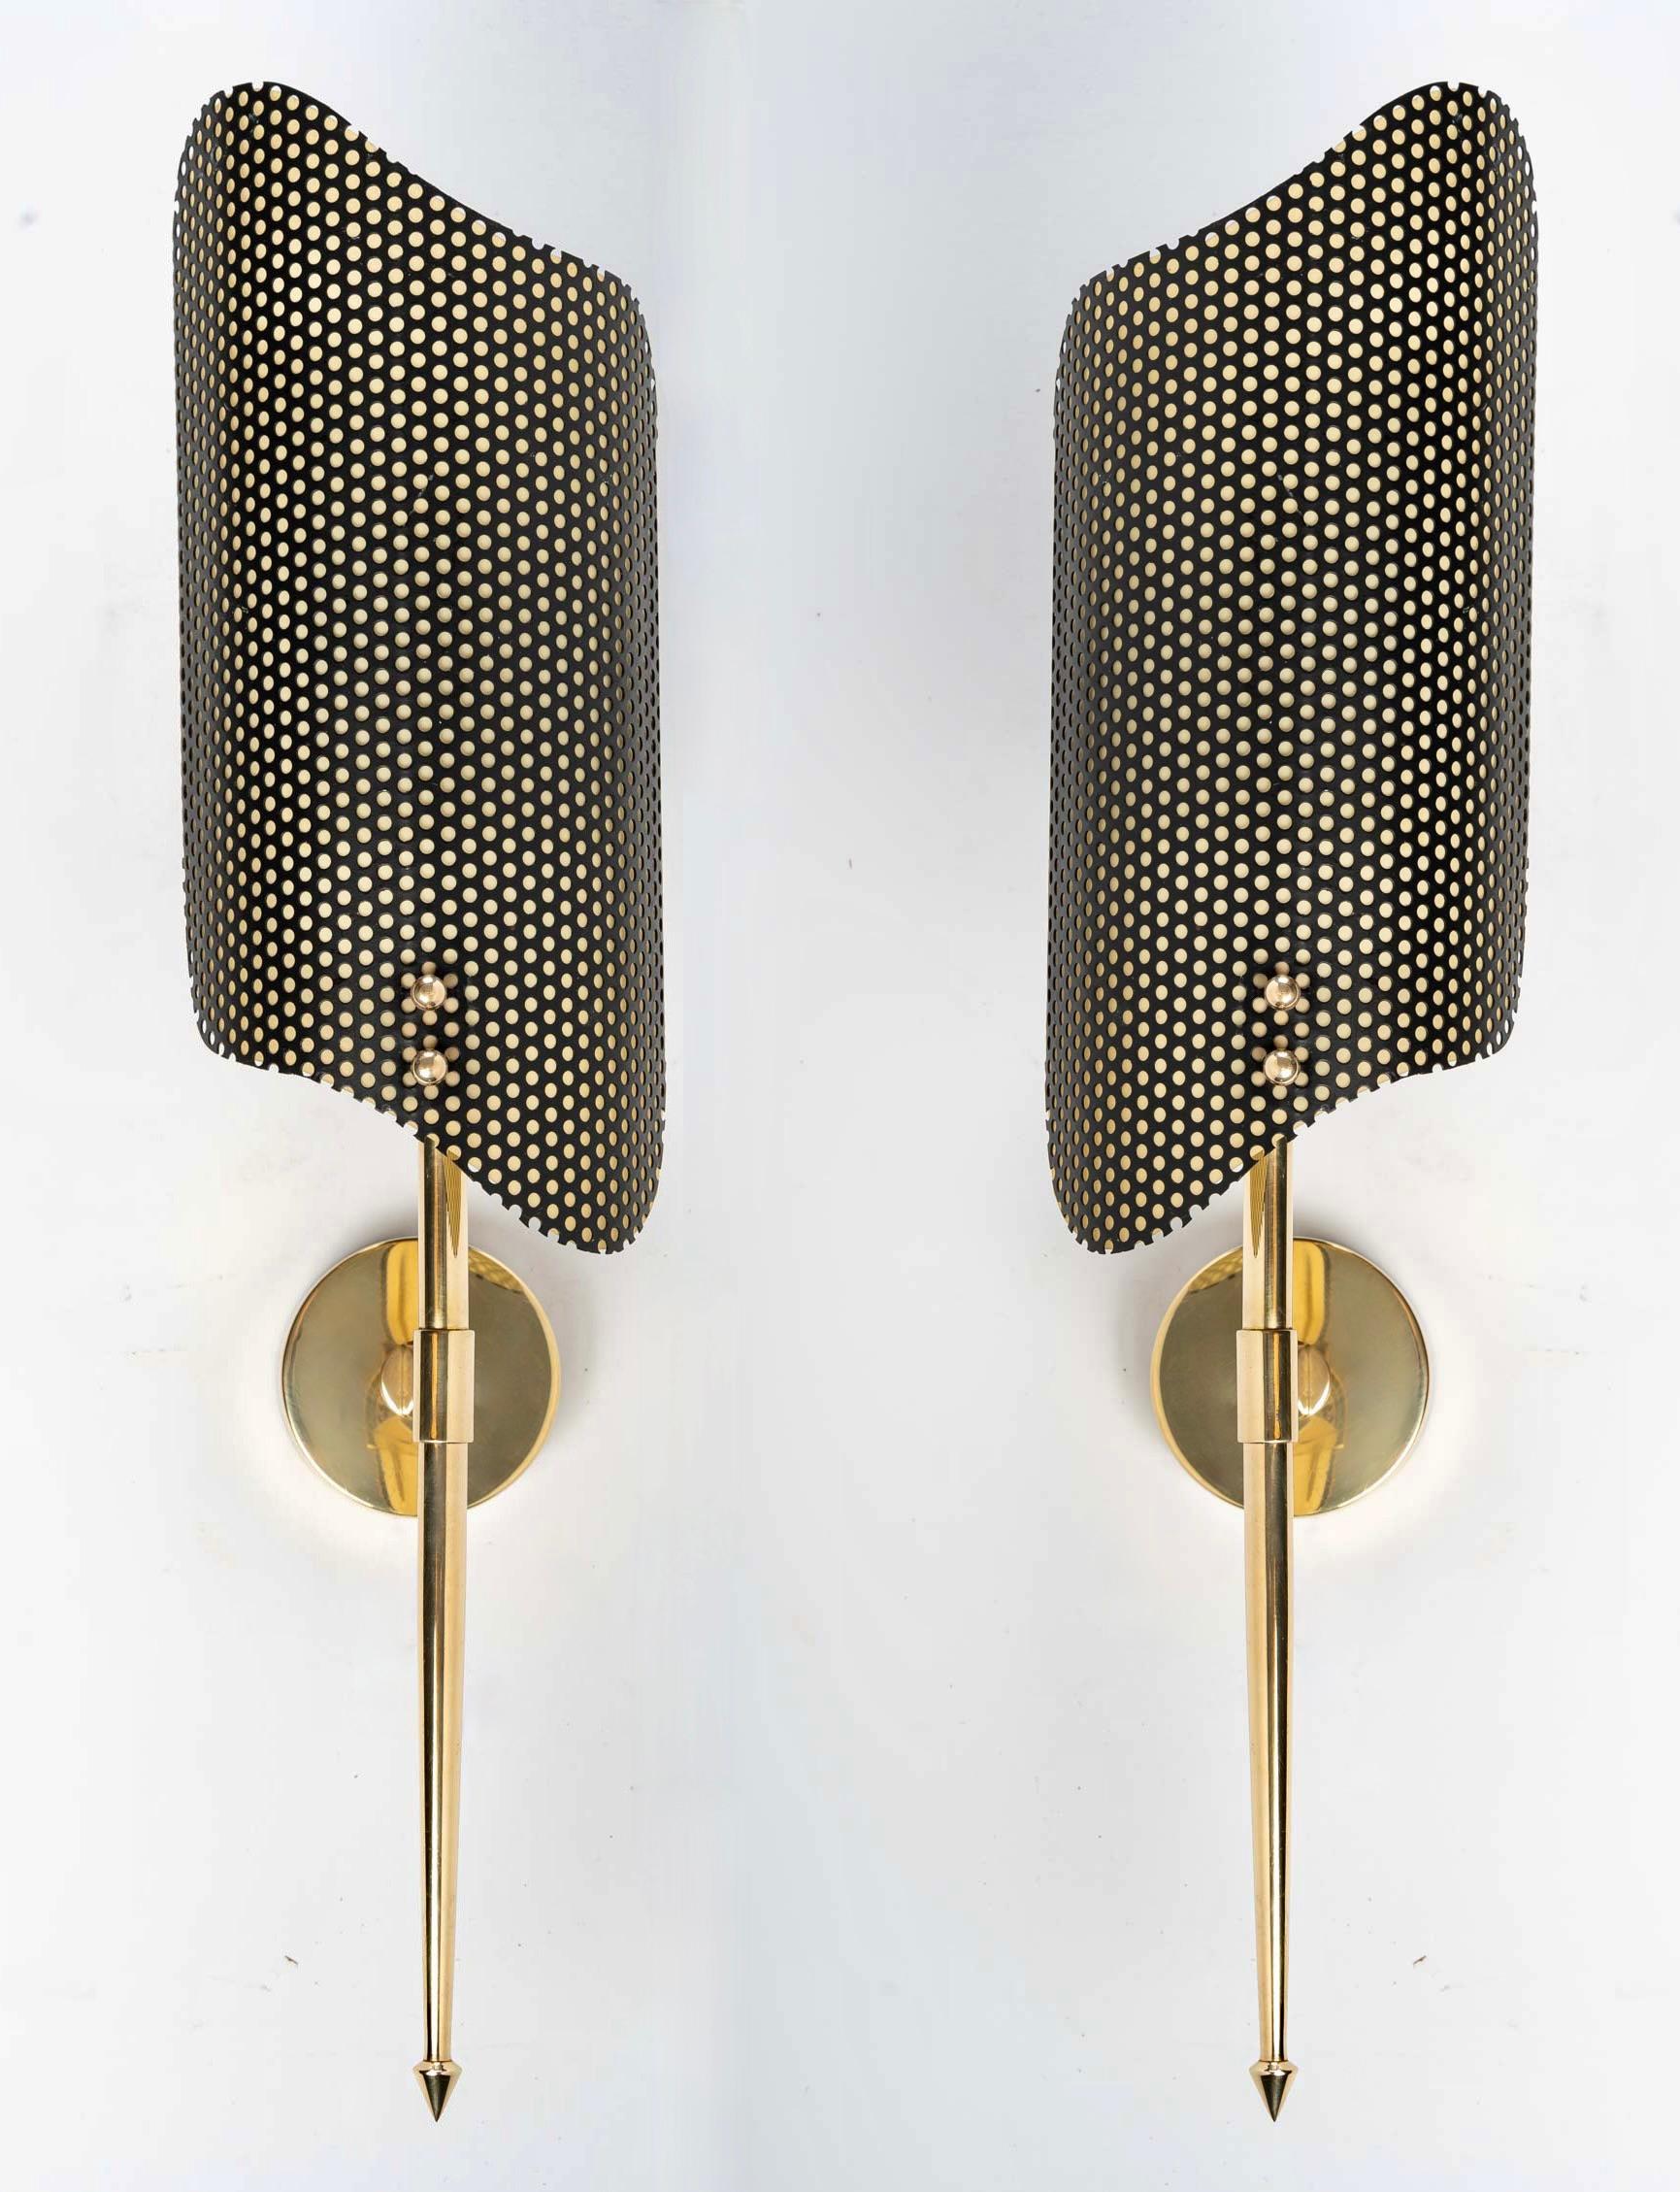 1950 Pair of sconces from the Maison d'Arlus

Composed of a stem in the shape of a point in gilded brass and surmounted by a very original lampshade in openwork black sheet metal entirely original, it is attached to the stem thanks to two small